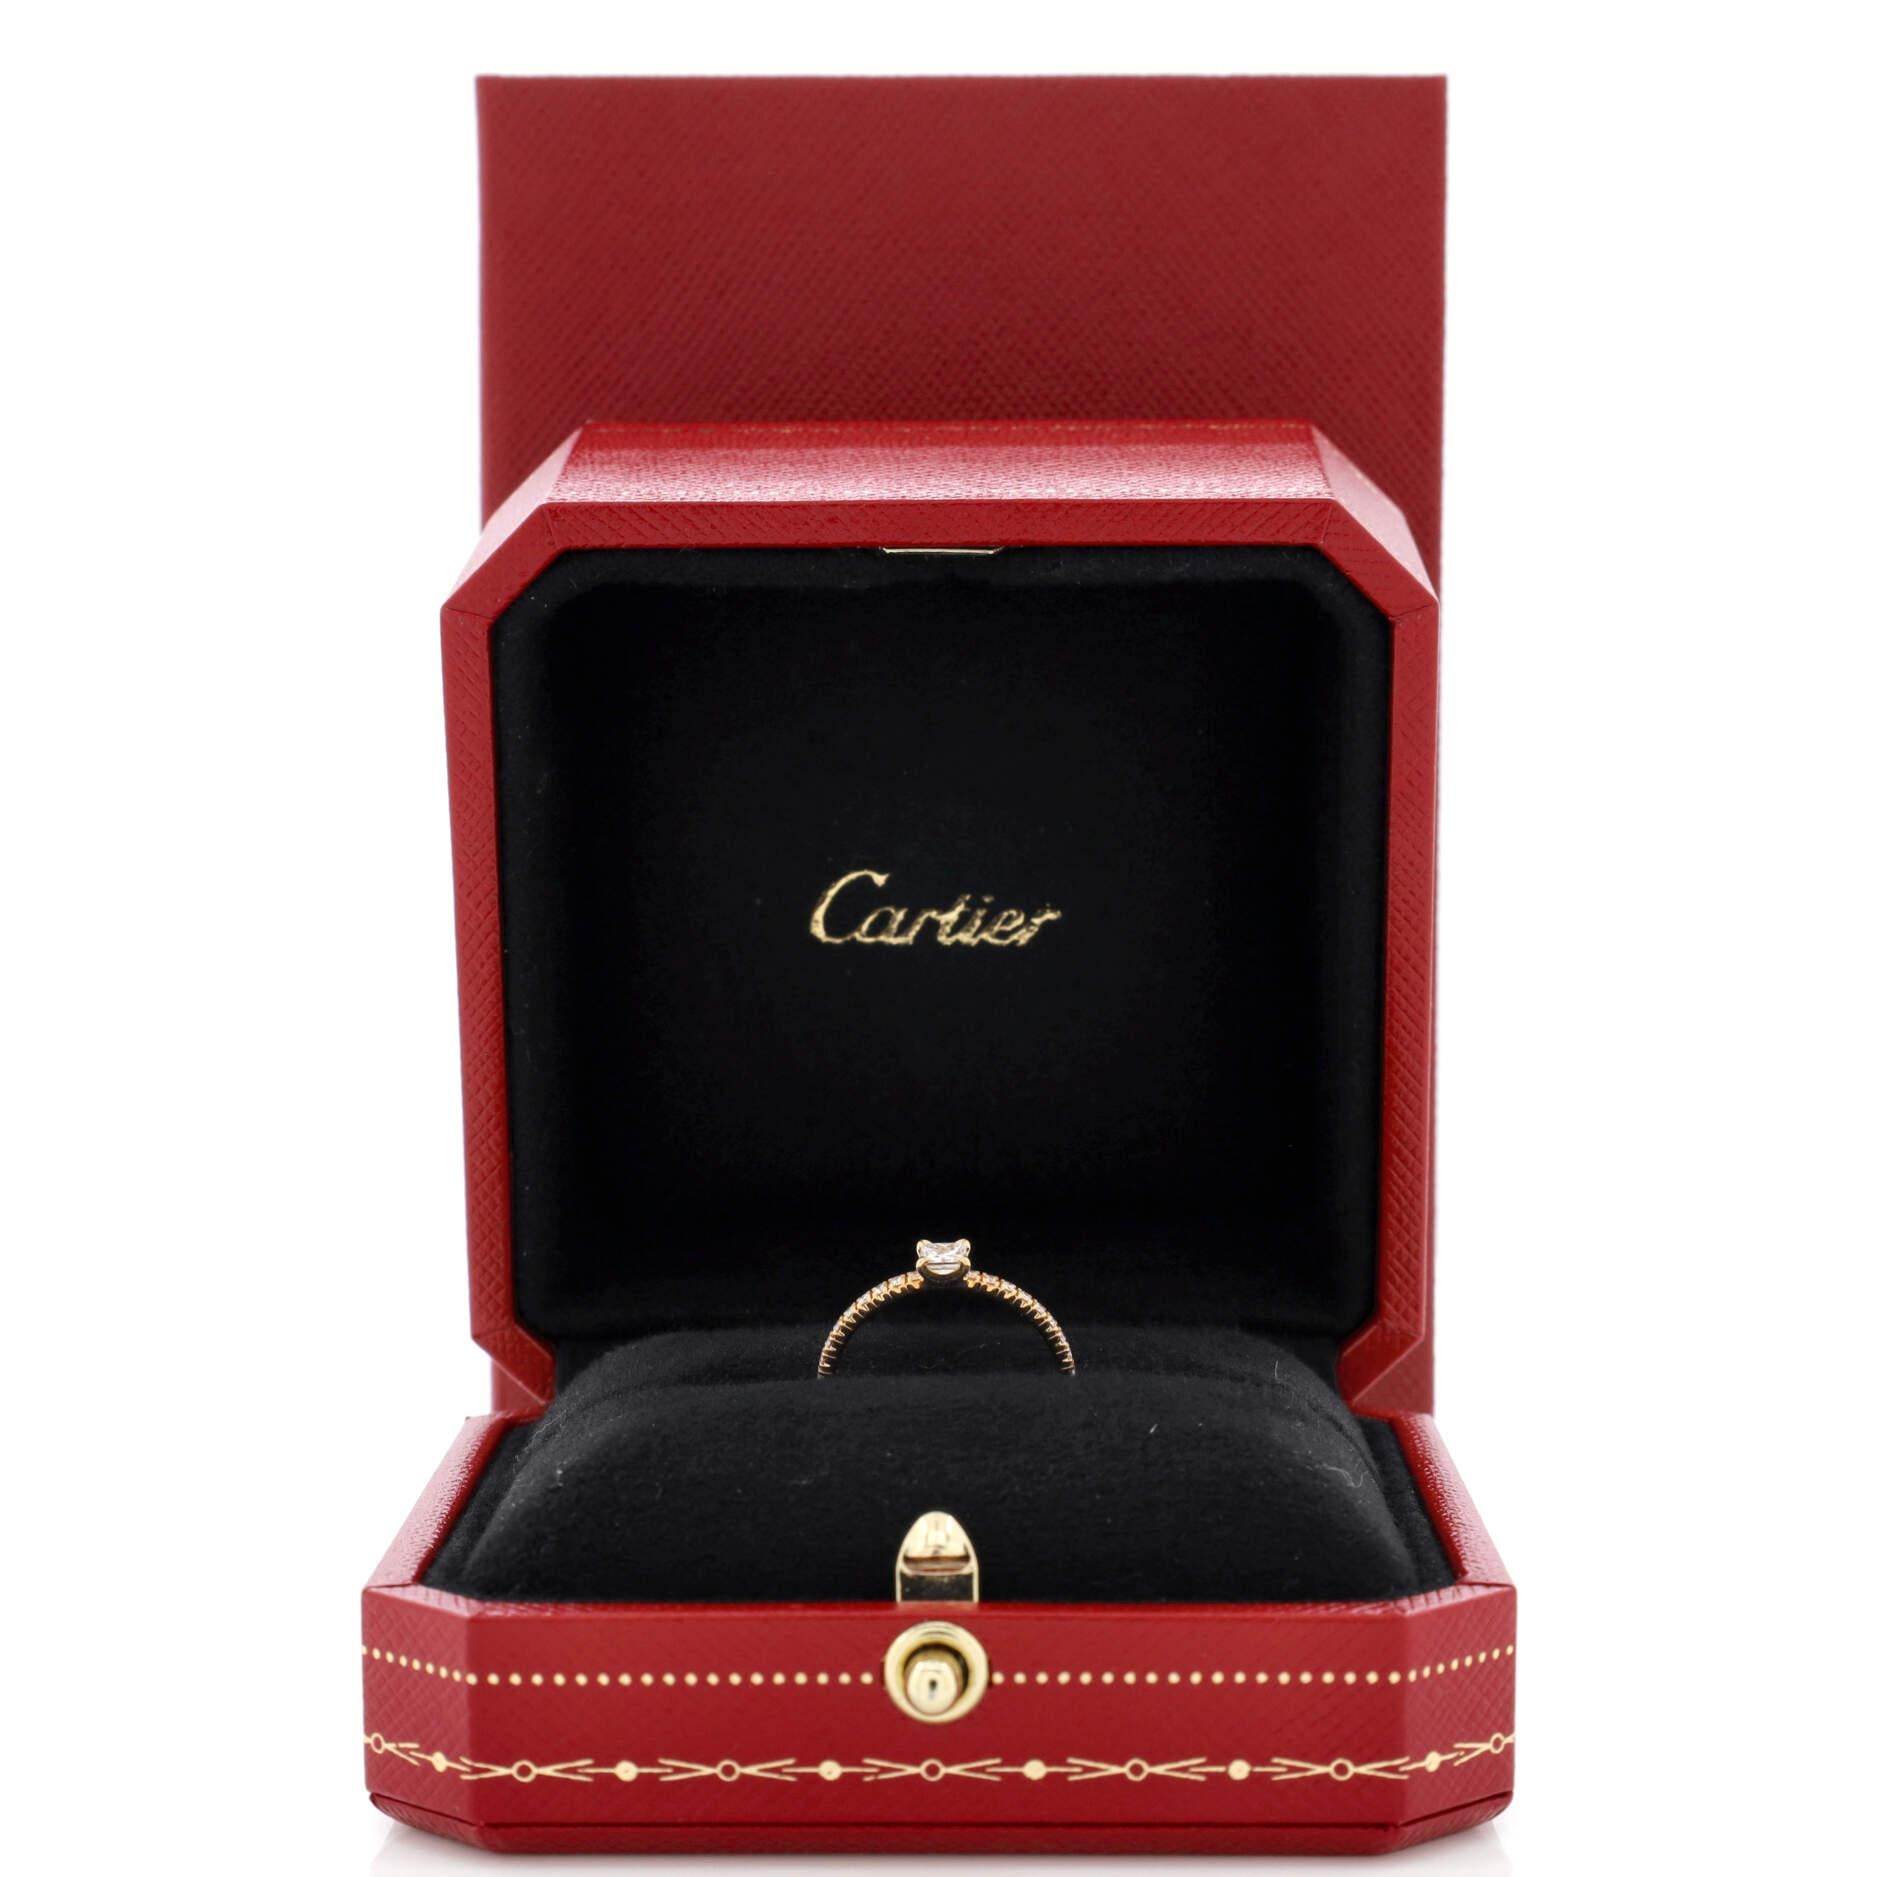 Condition: Very good. Moderate wear throughout.
Accessories:
Measurements: Size: 4.75 - 49, Width: 1.35 mm
Designer: Cartier
Model: Etincelle de Cartier Ring 18K Rose Gold with Princess Cut Diamond and Pave Diamonds
Exterior Color: Yellow Gold
Item